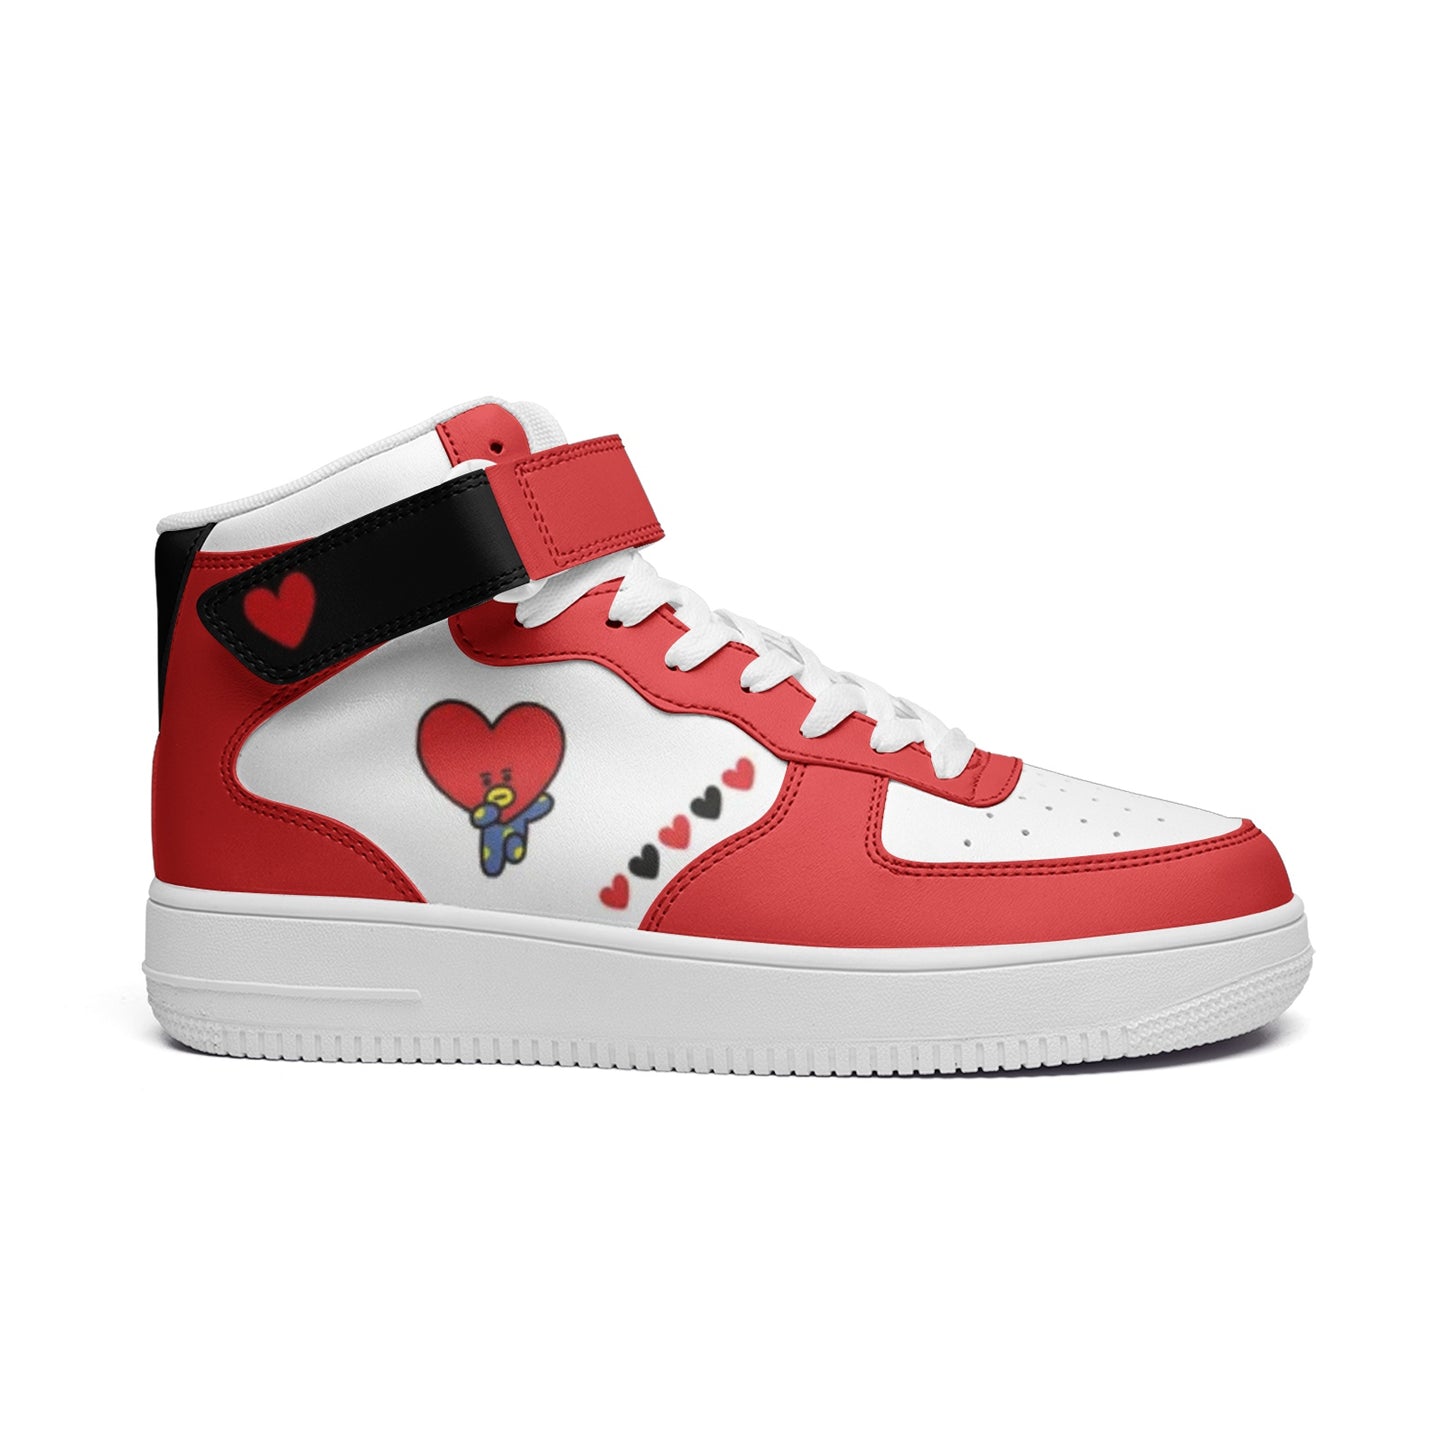 BT21 Tata Unisex high Top Leather Sneakers